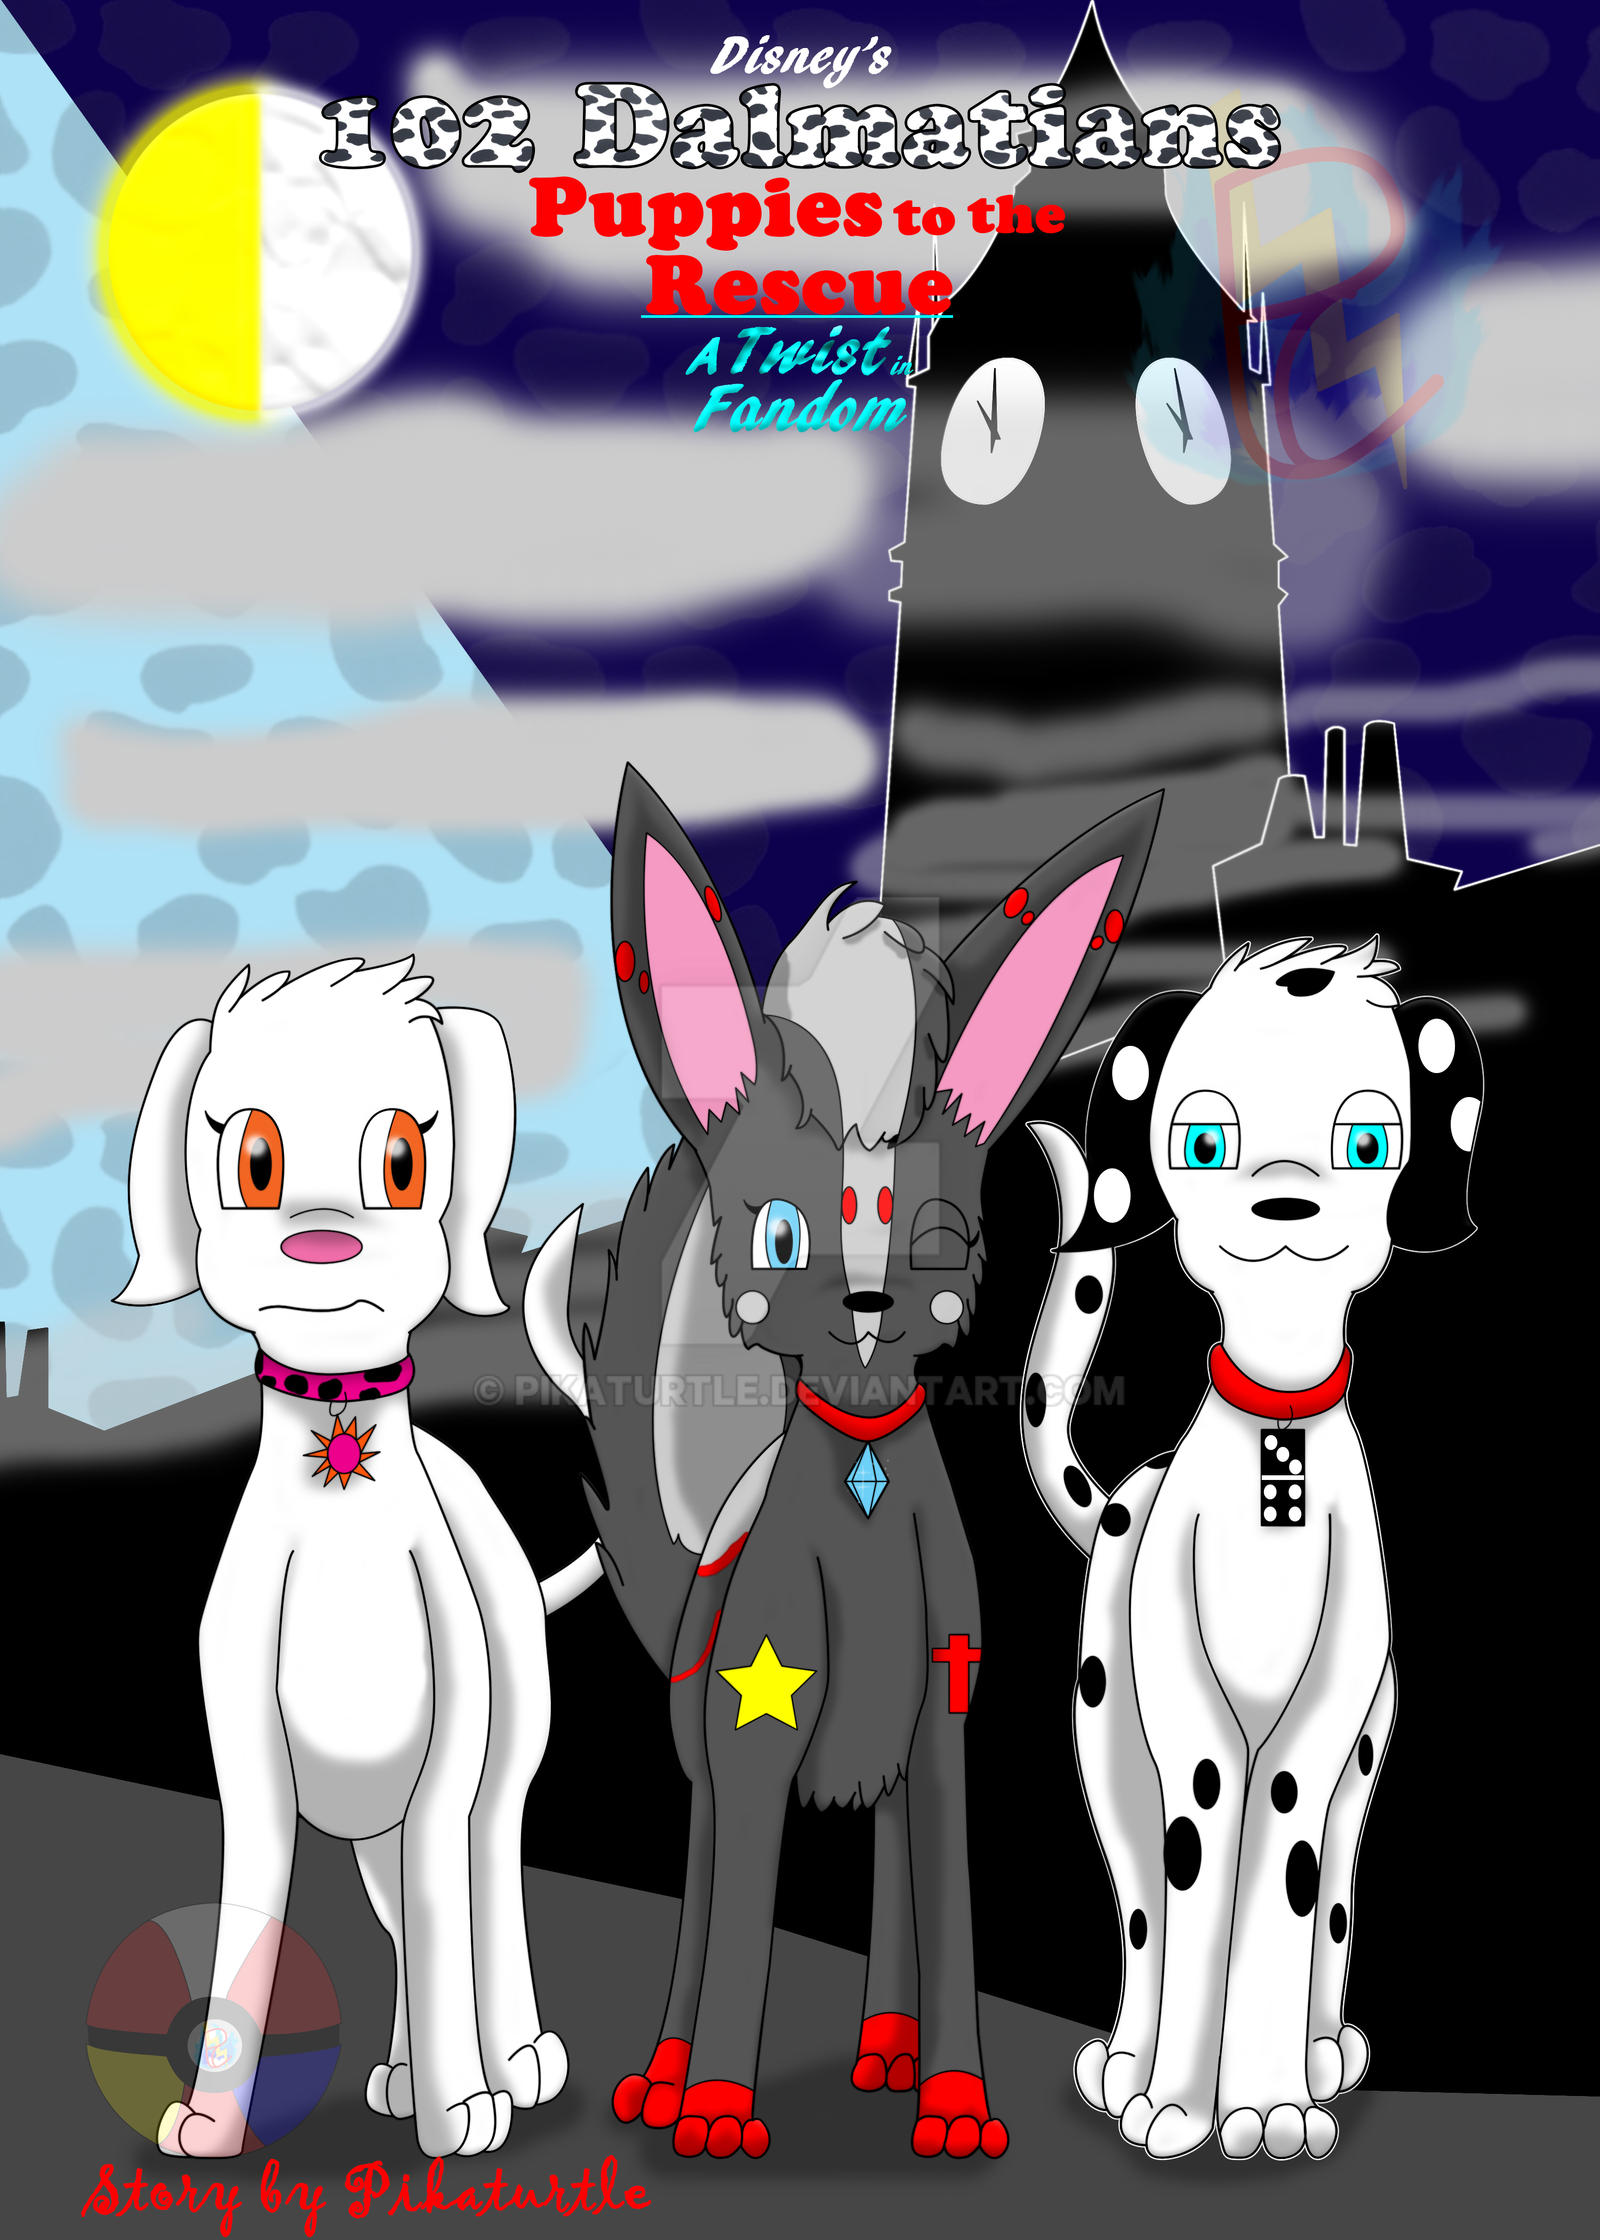 102 Dalmatians: PTTR: A Twist in Fandom Cover by 